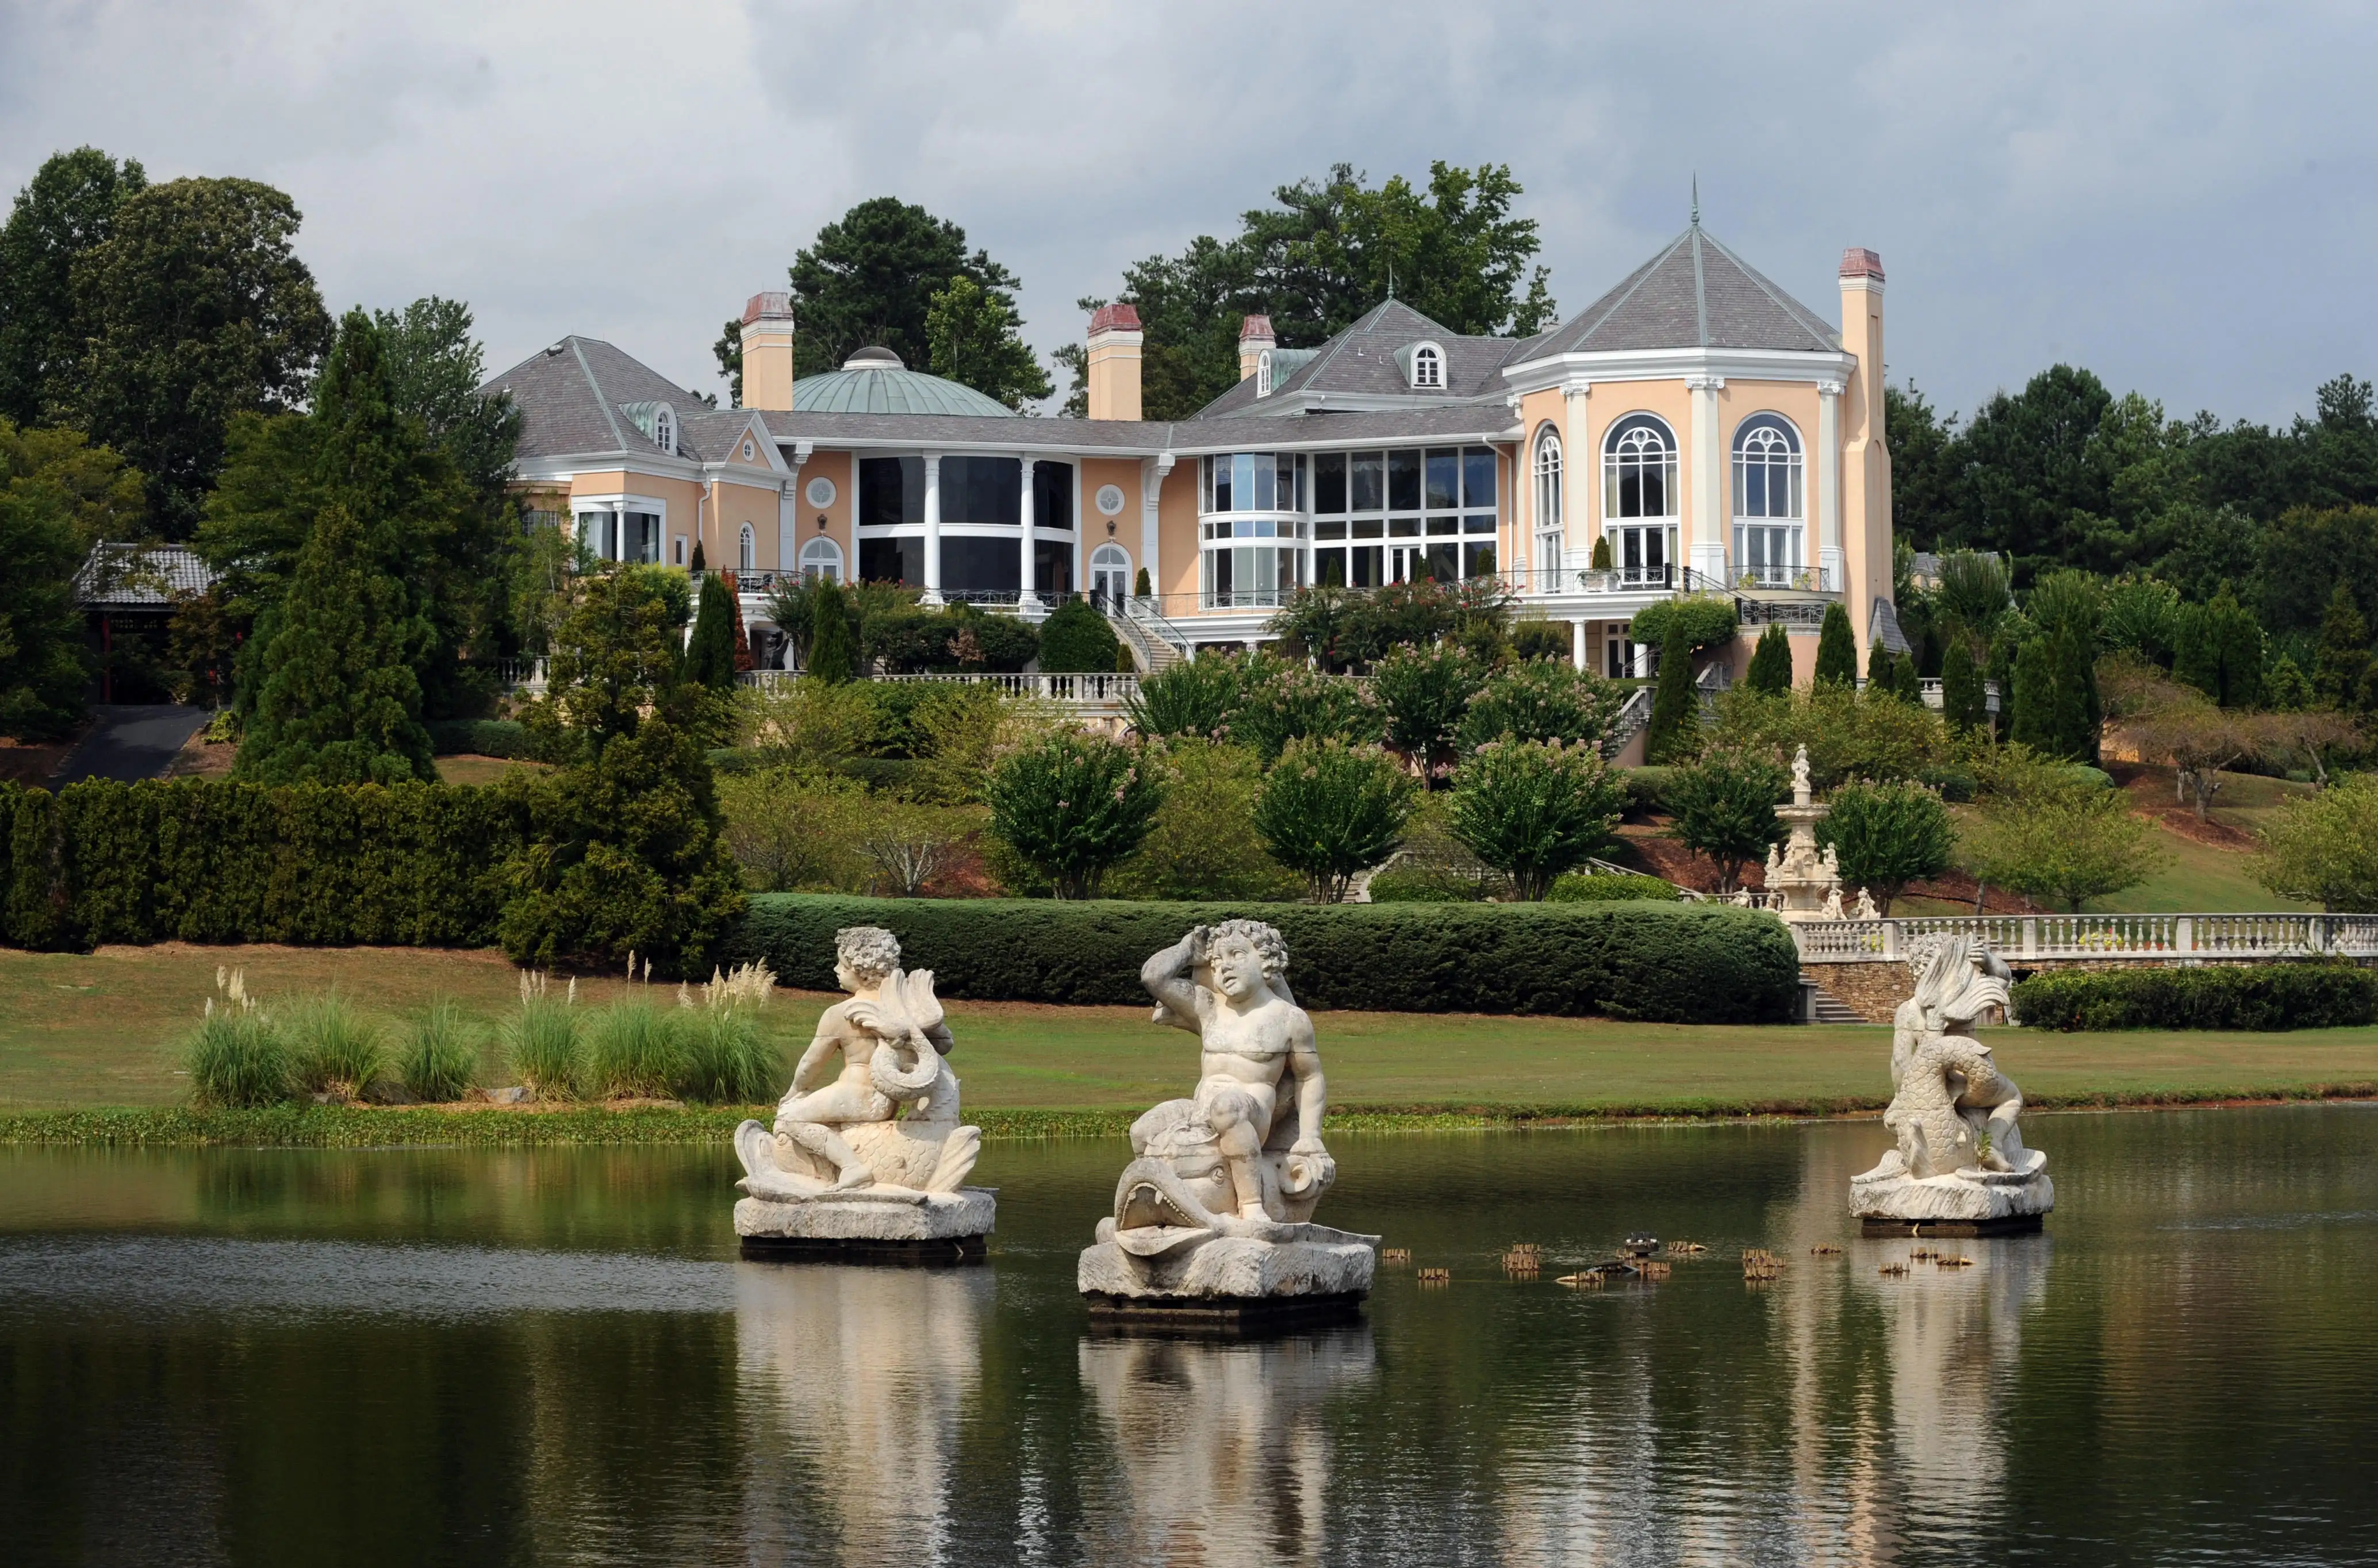 10. Johns Creek, Georgia: Along with a median income of $109,132, Johns Creek is known for the Dean Gardens estate. Once owned by actor  Tyler Perry, it is now in the hands of a developer.